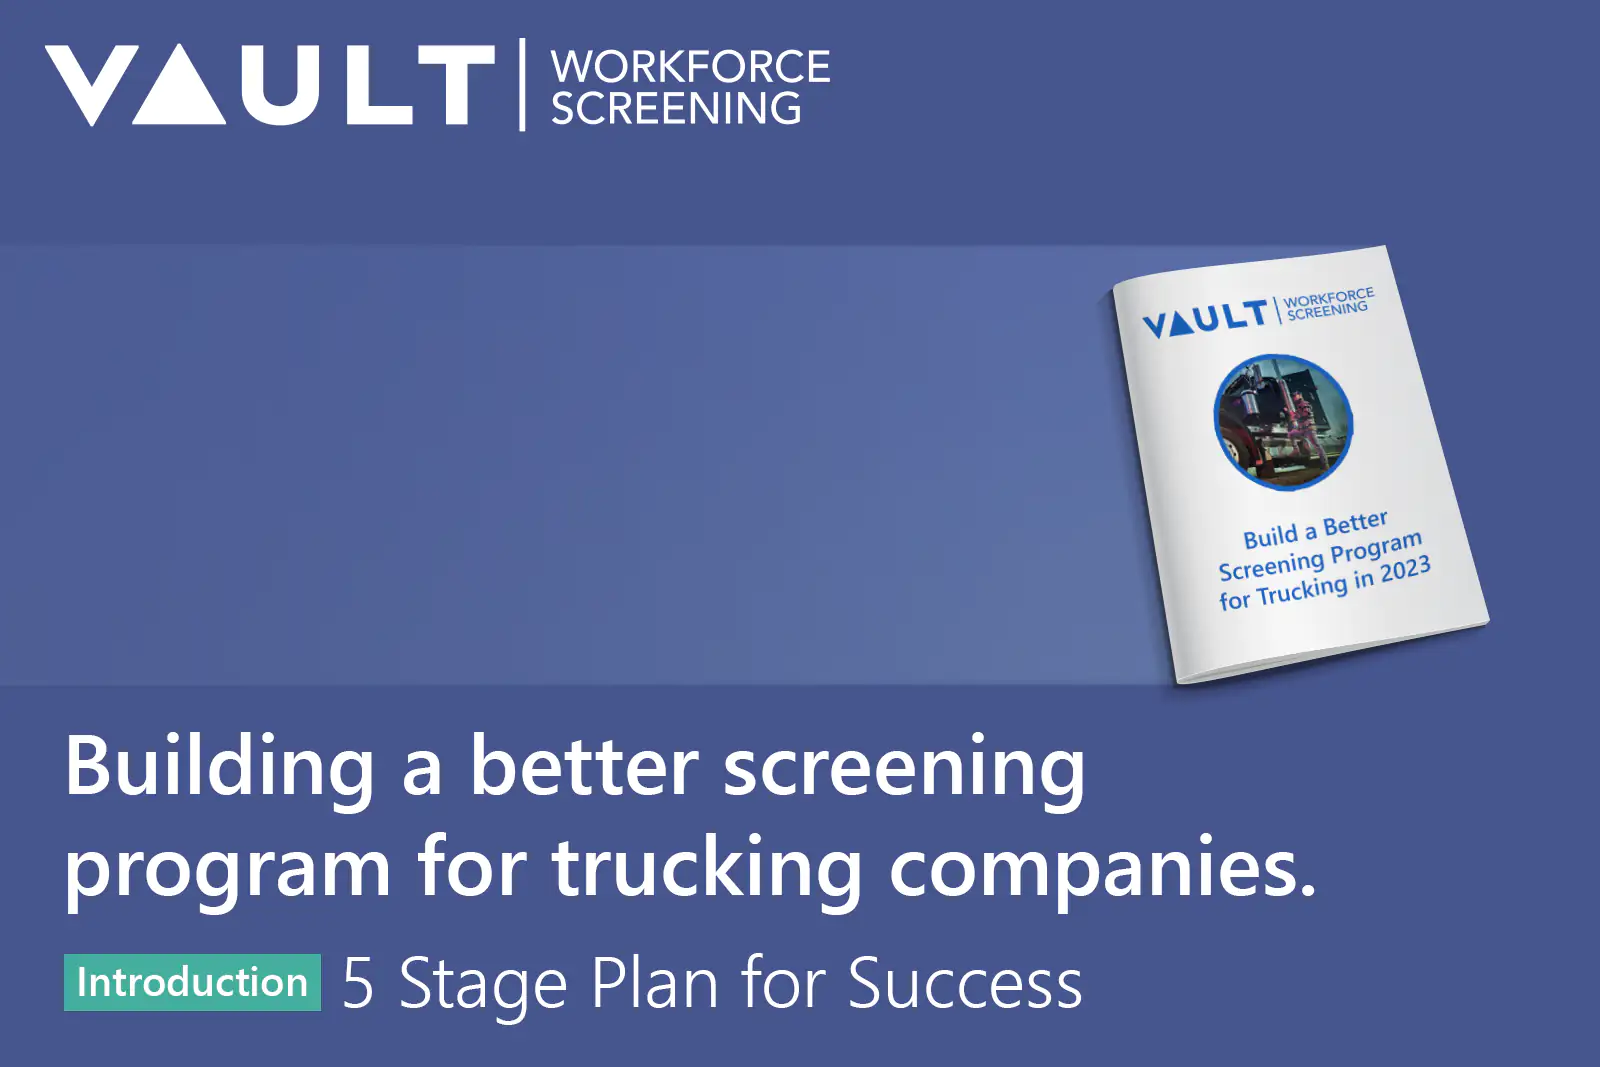 Building a better screening program for trucking: a 5 stage plan